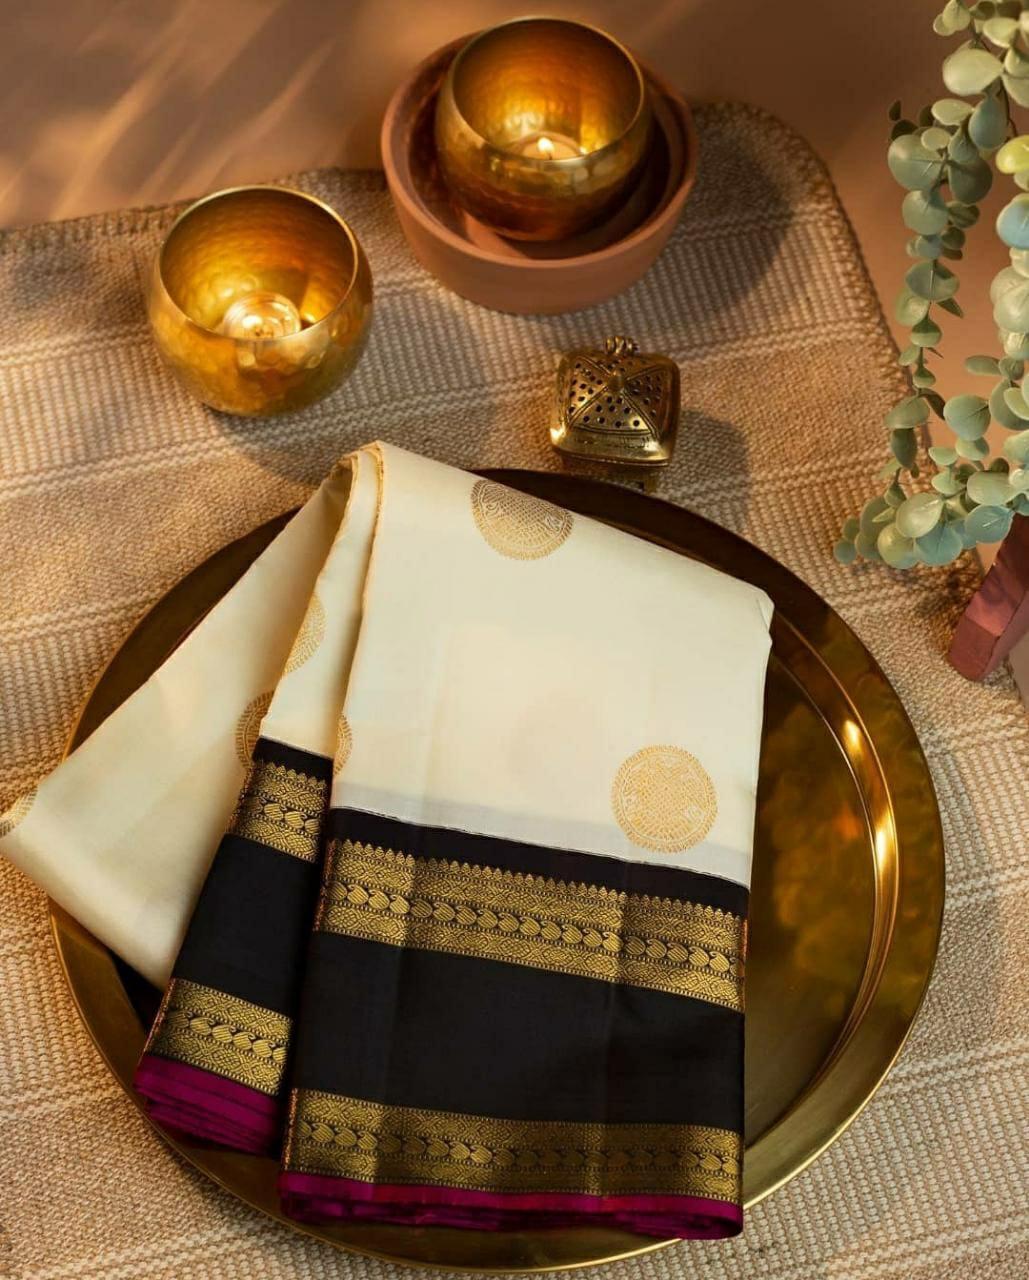 Flattering Off White  Colour Traditional Looking Silk Saree